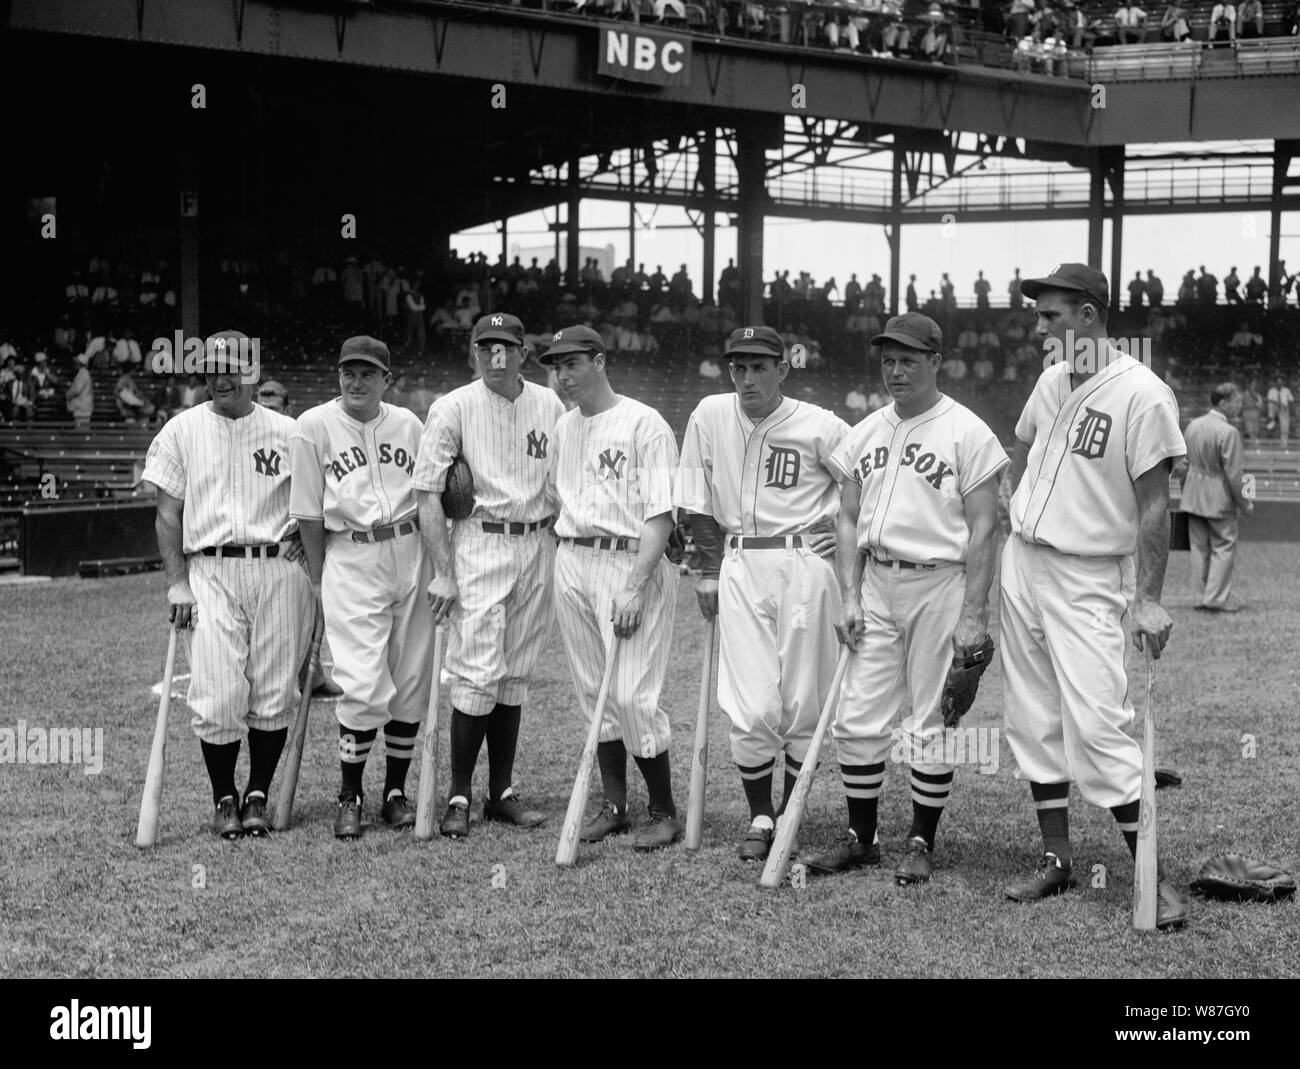 Original title: Plenty of basehits in these bats  Original description: Washington D.C., July 7. A million dollar base-ball flesh is represented in these sluggers of the two All- Star Teams which met in the 1937 game at Griffith Stadium today. Left to right: Lou Gehrig, Joe Cronin, Bill Dickey, Joe DiMaggio, Charlie Gehringer, Jimmie Foxx, and Hank Greenberg, 7/7/37 Stock Photo